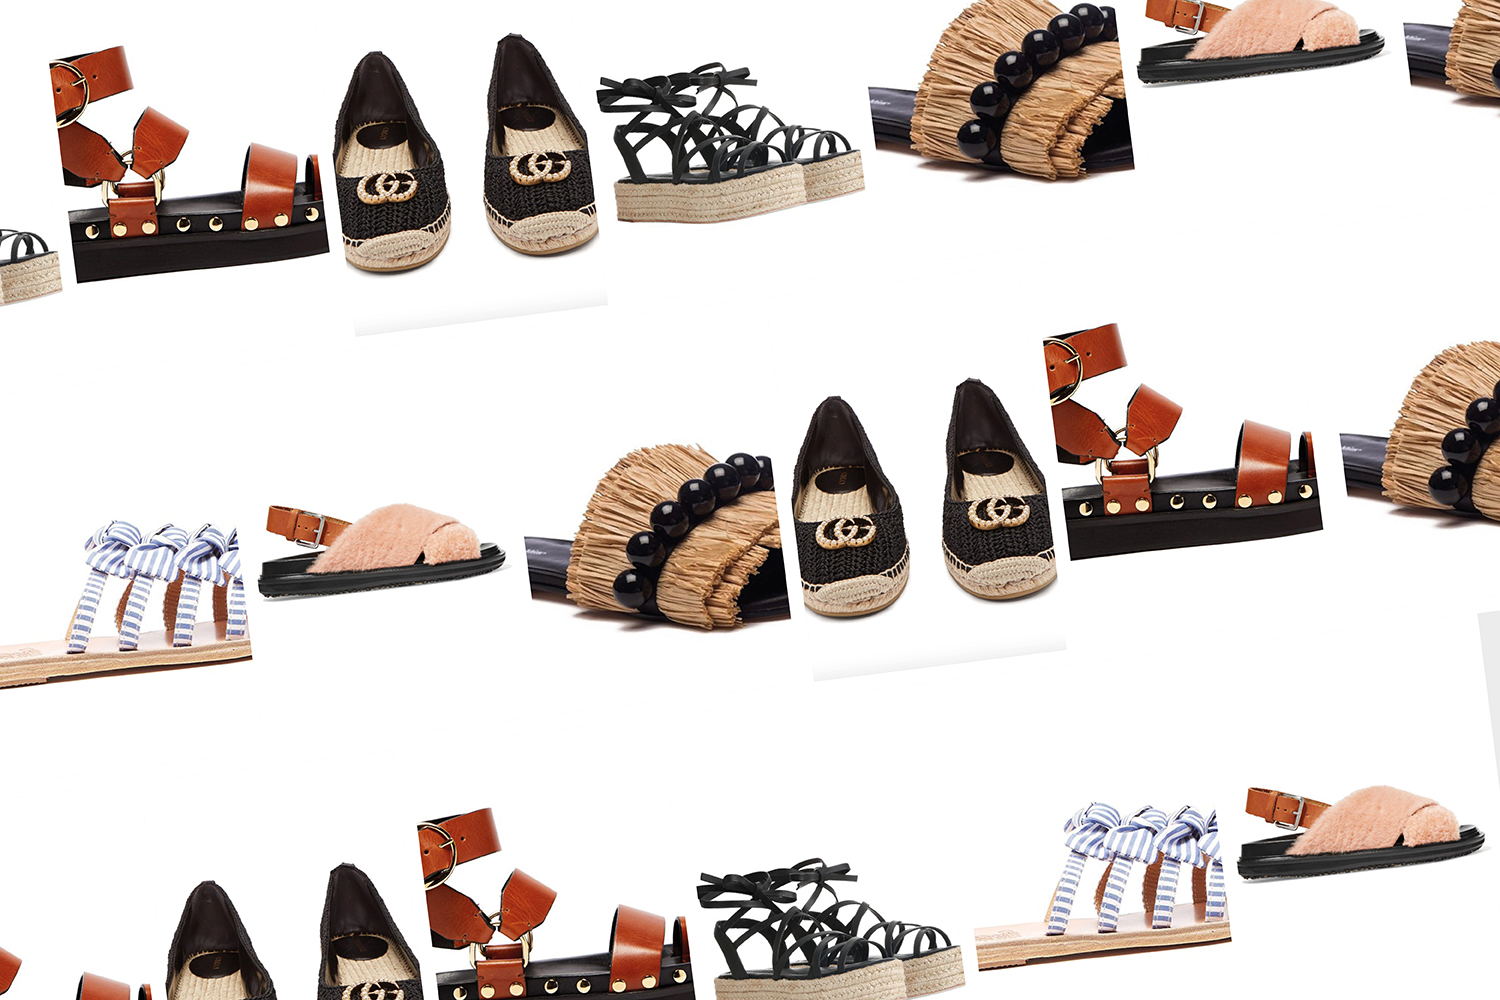 The Sandals You Need for the Summer Season